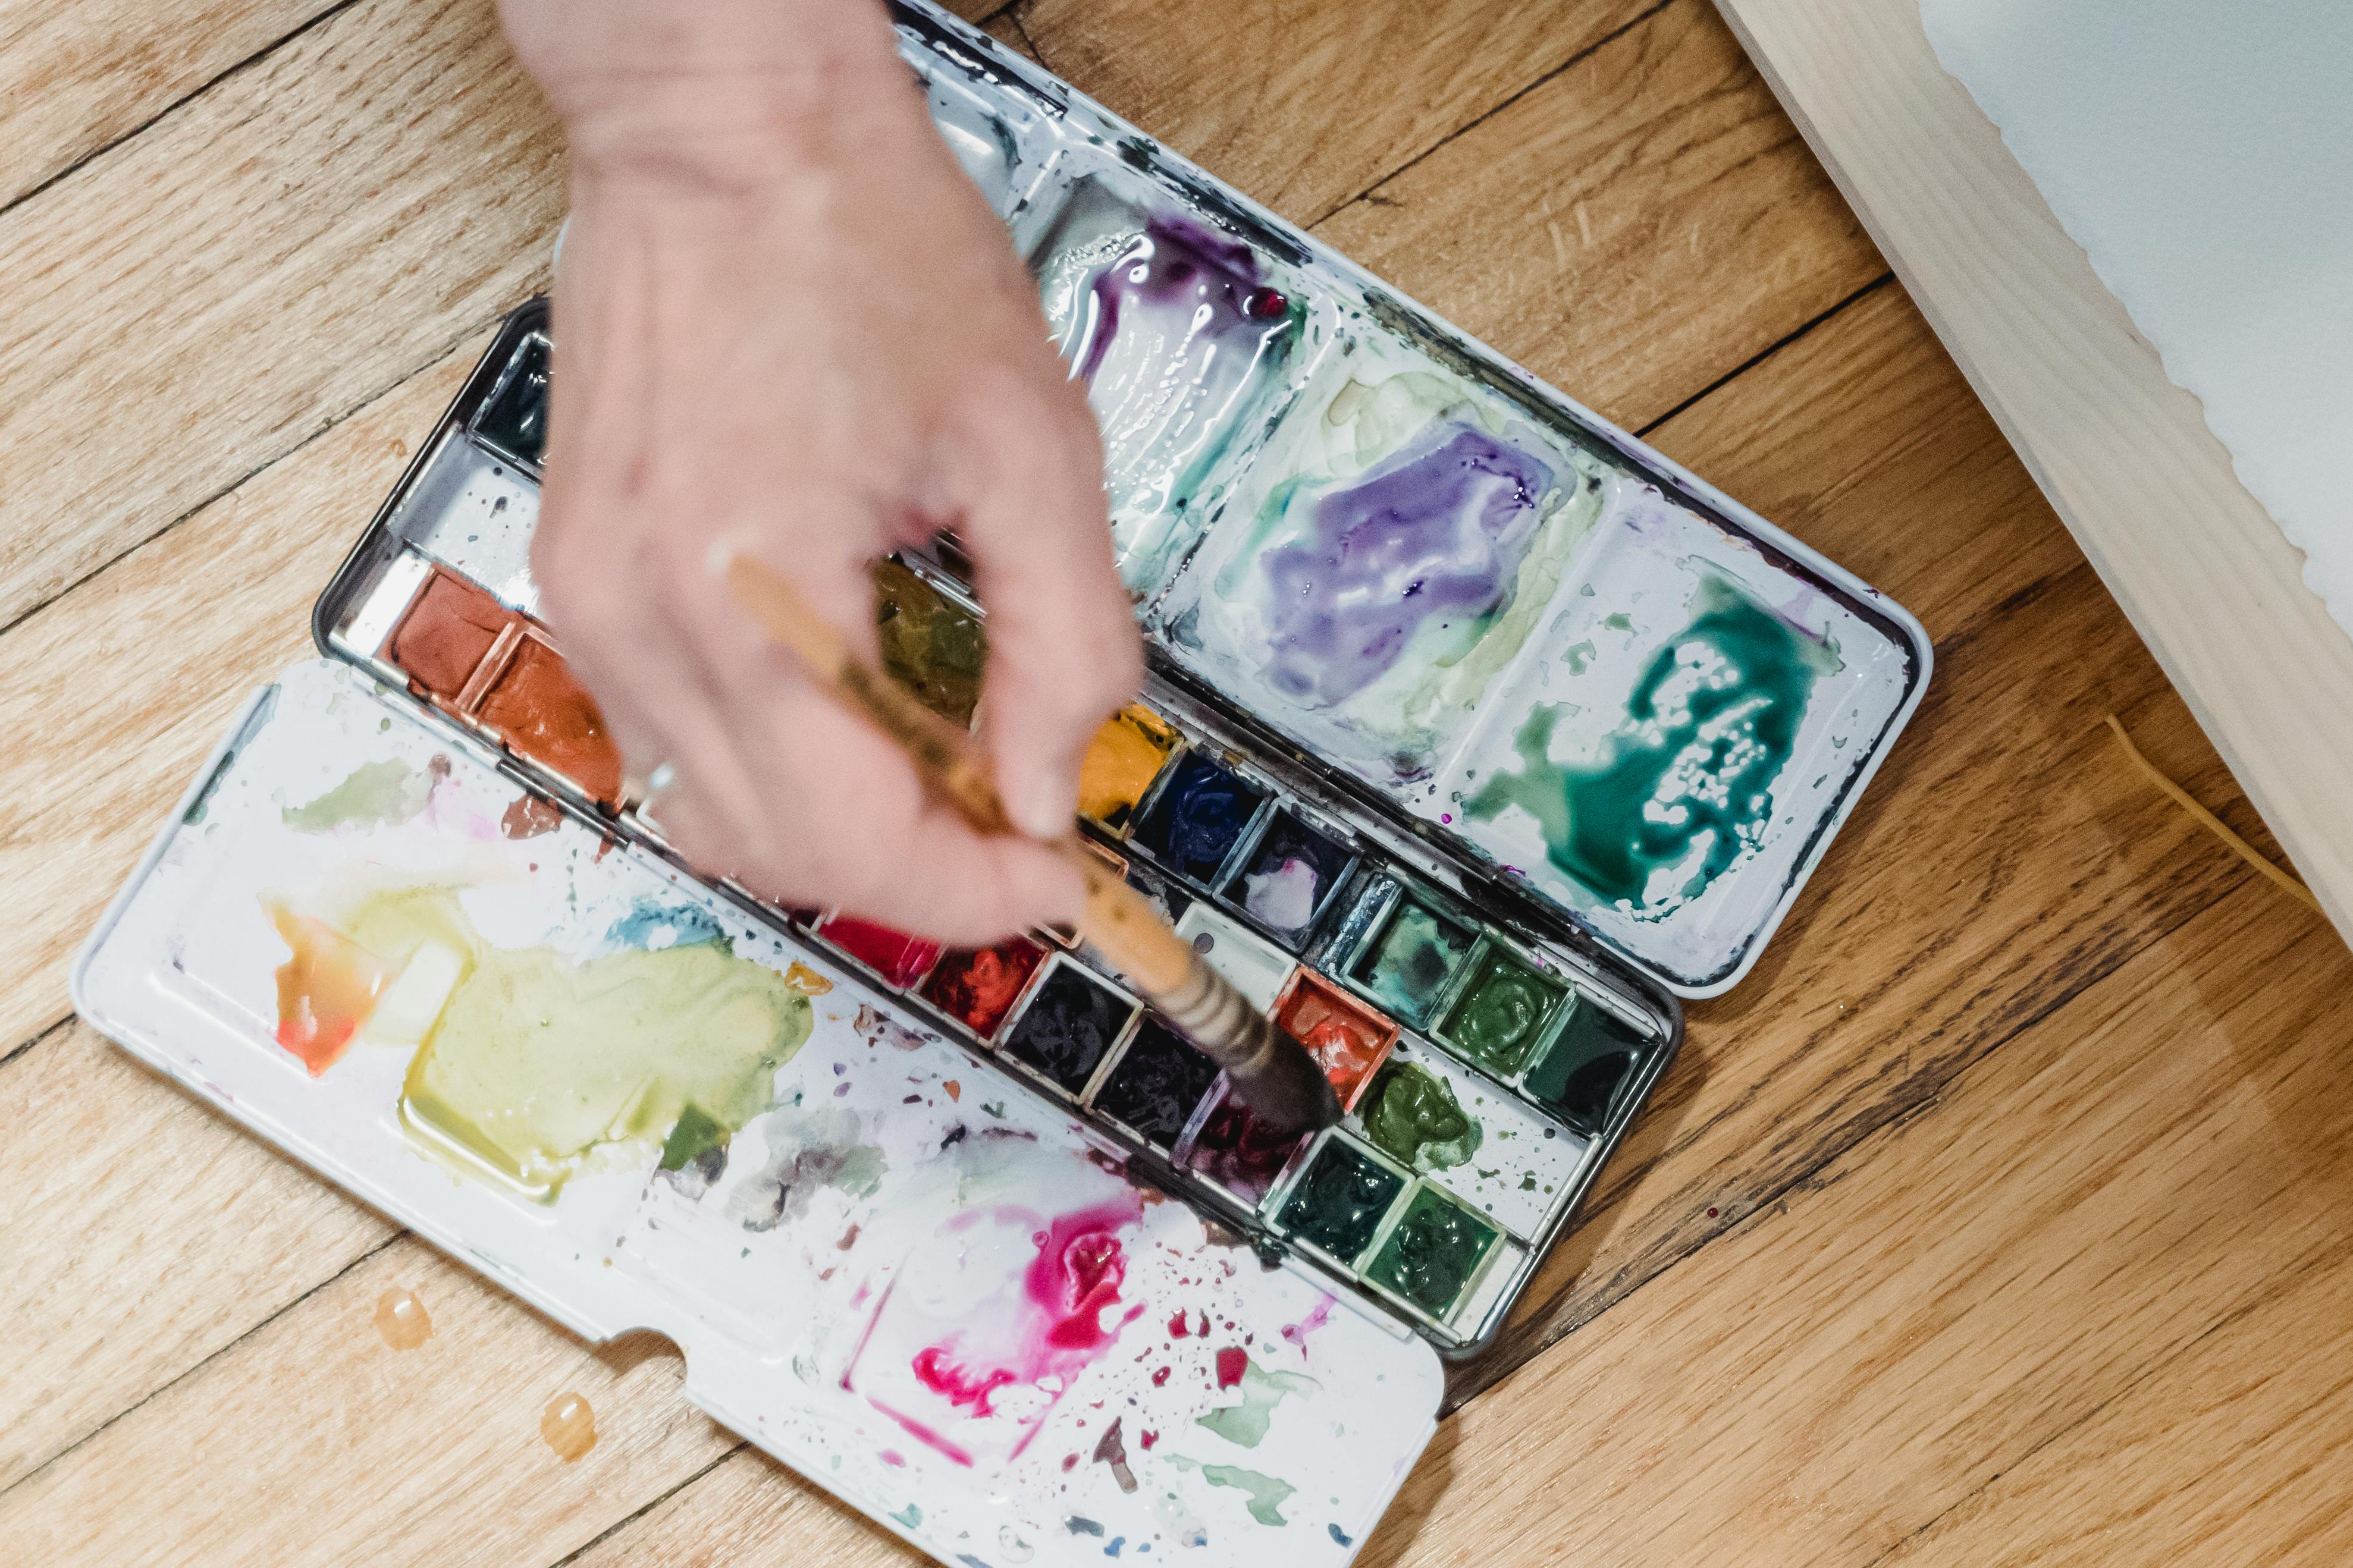 Mixing Watercolors with a Limited Color Palette – Camera and a Canvas